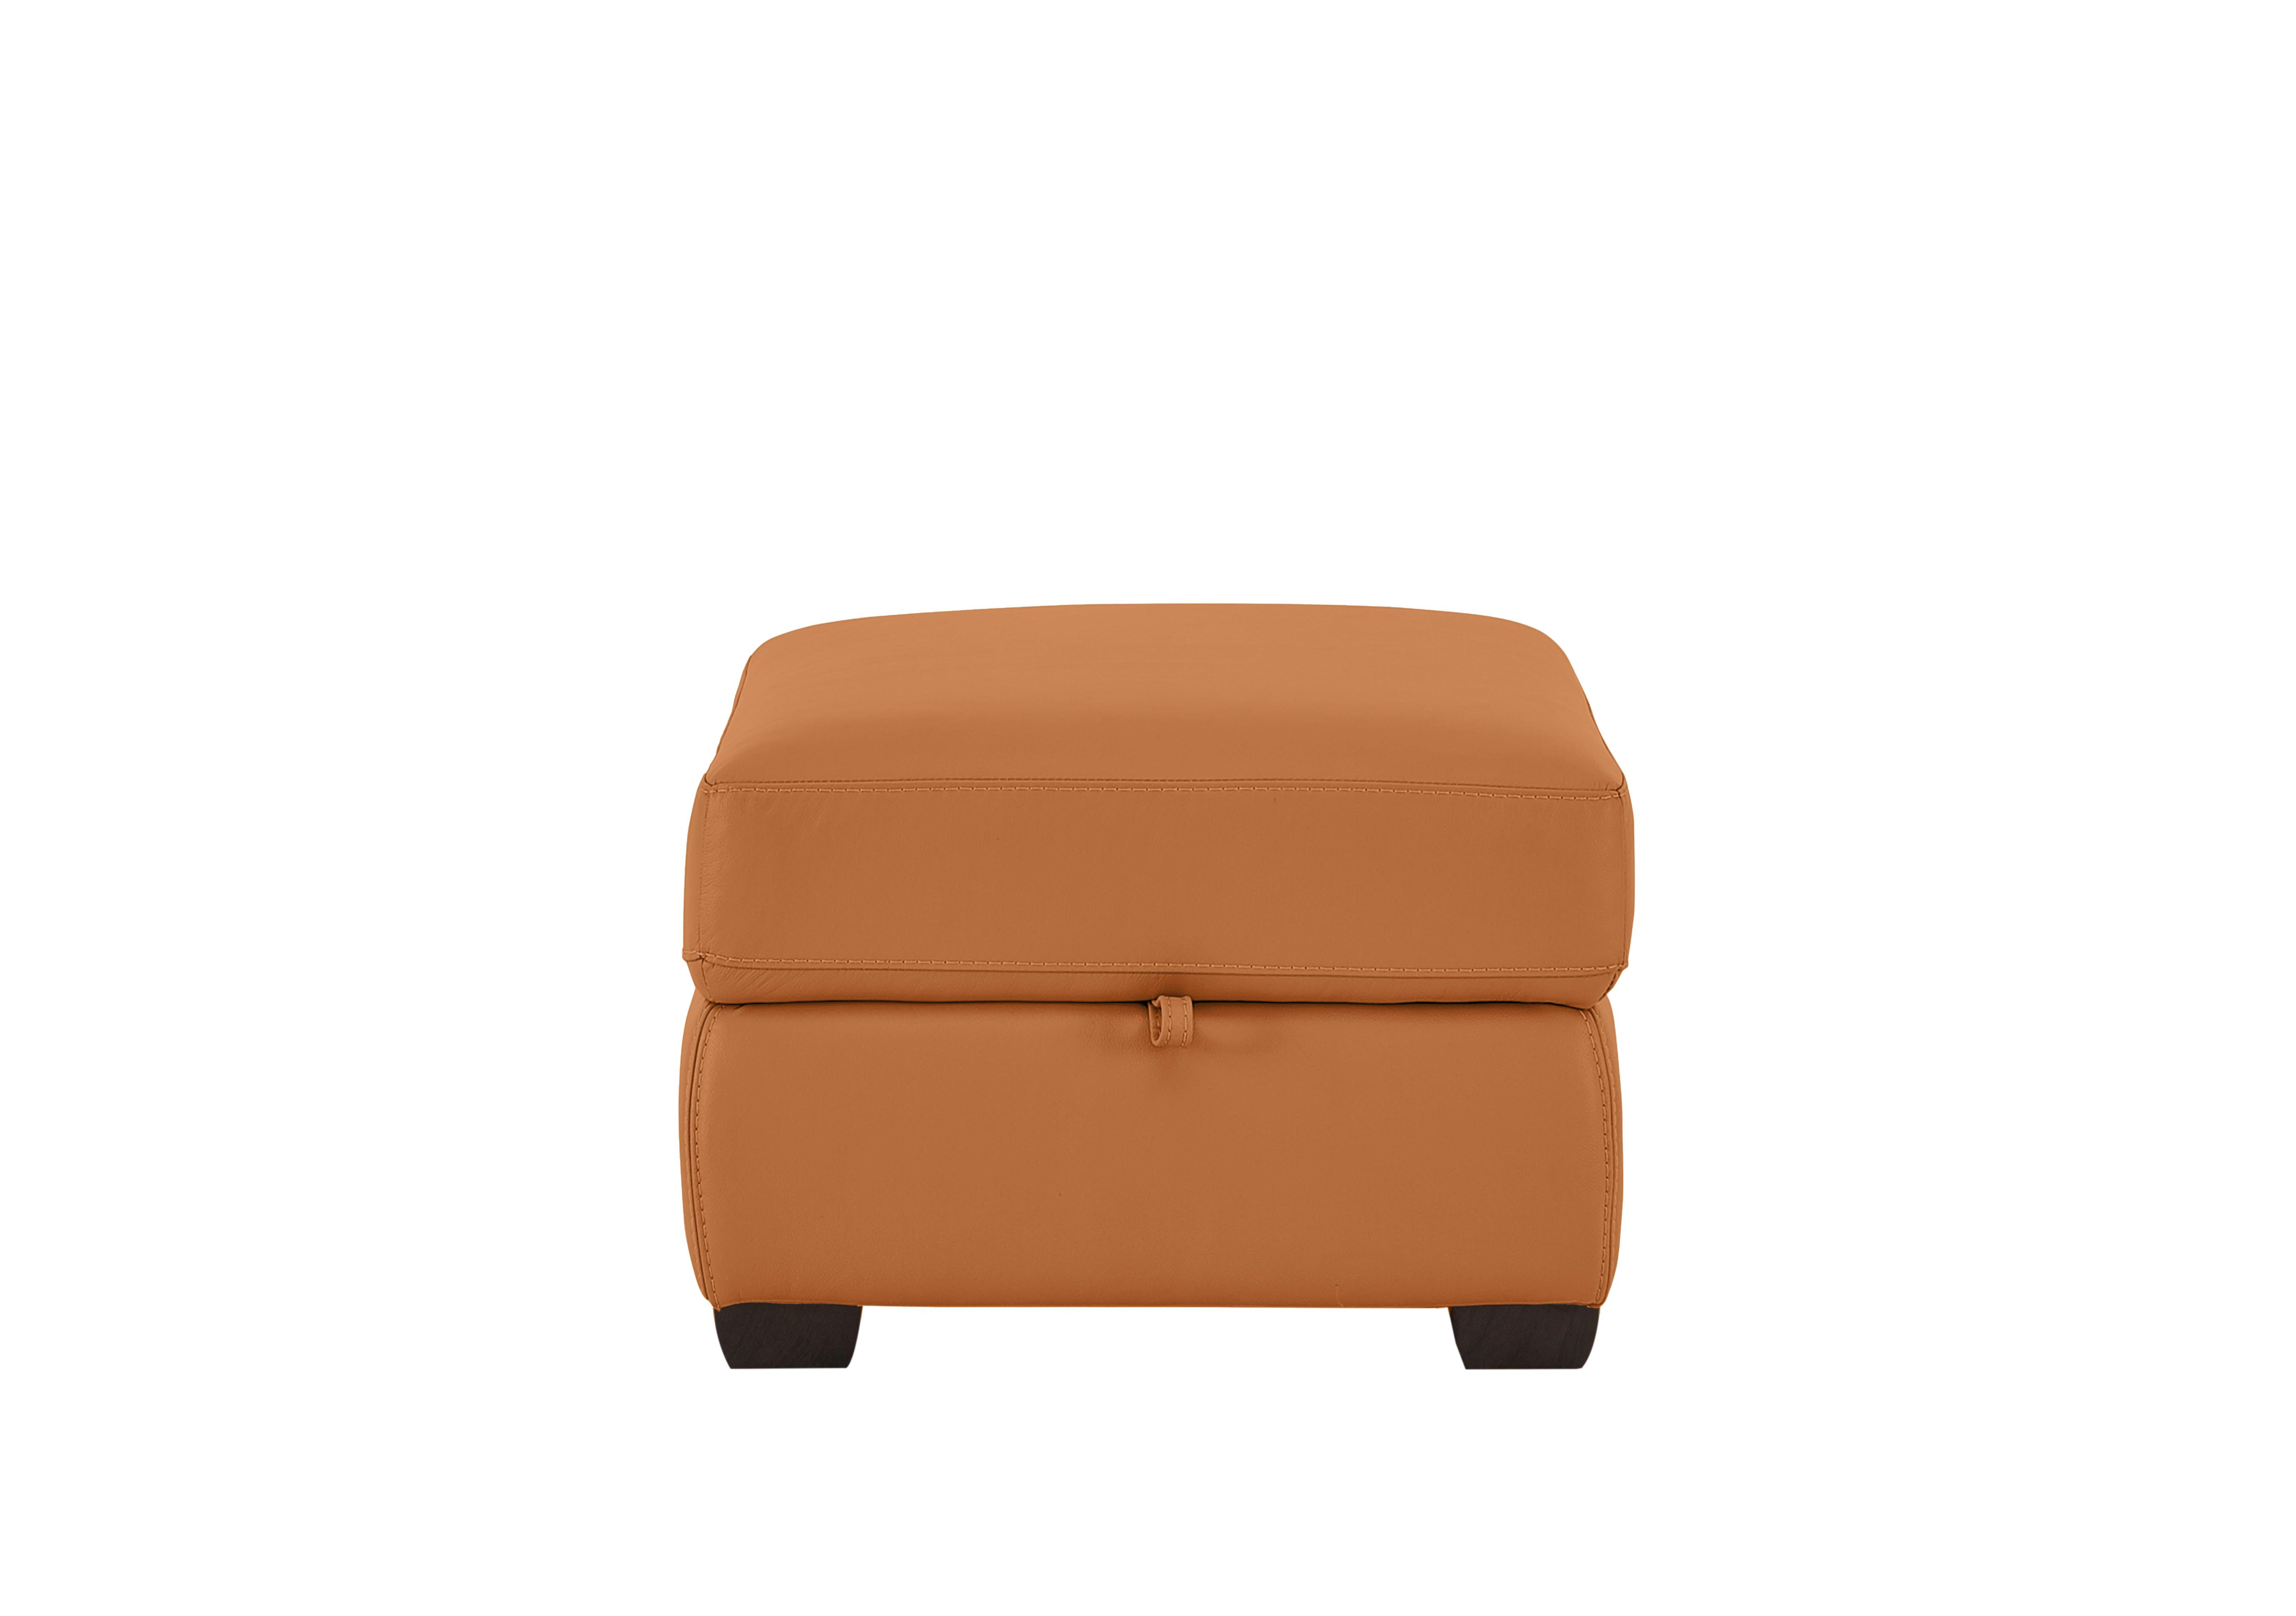 Chicago Leather Storage Stool in Bv-335e Honey Yellow on Furniture Village